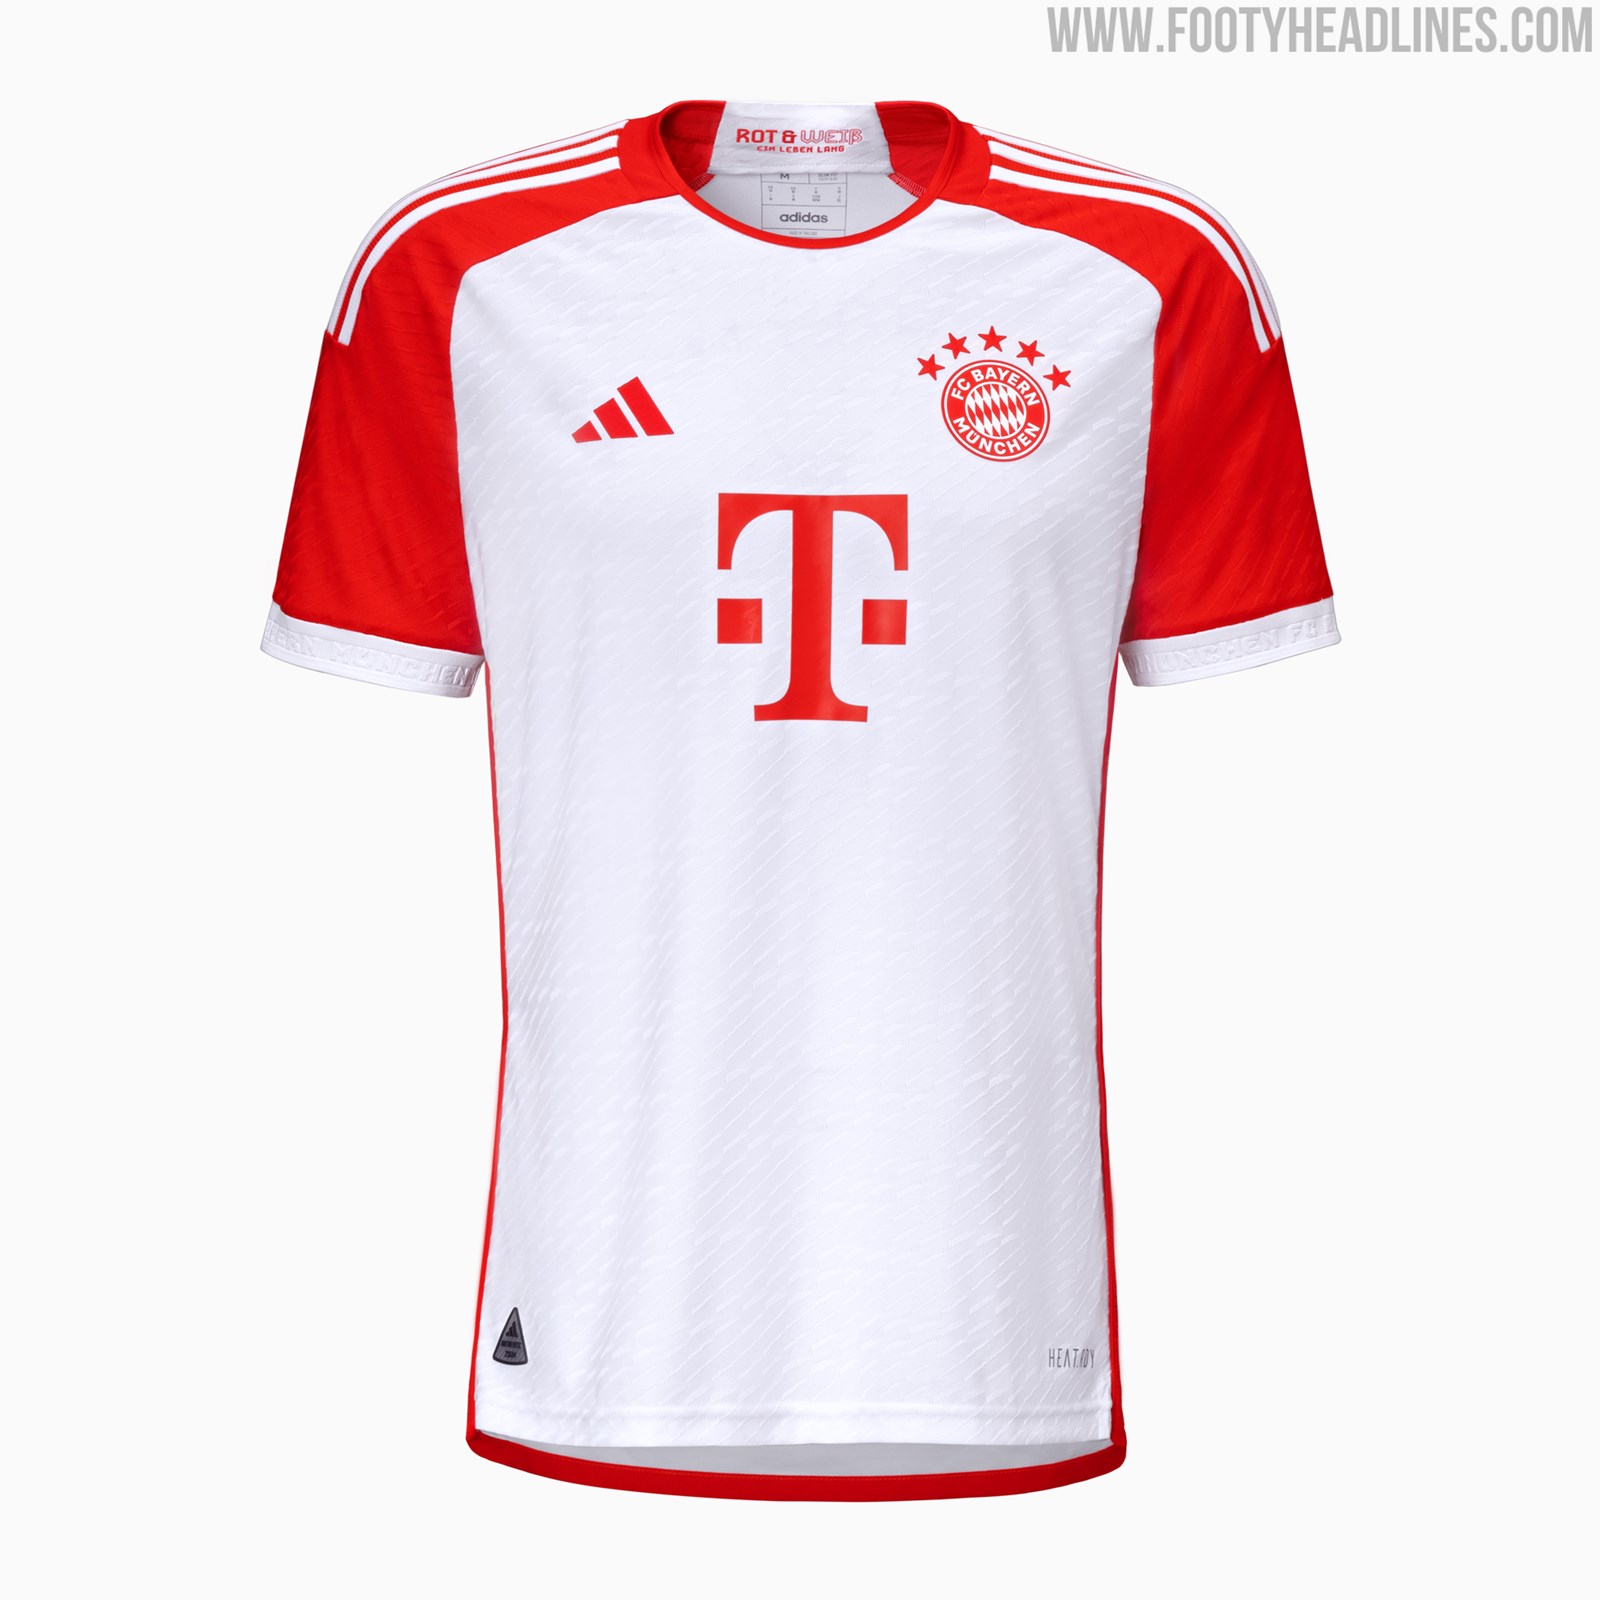 Unique Bayern München 2324 Home Kit Font Released Footy Headlines